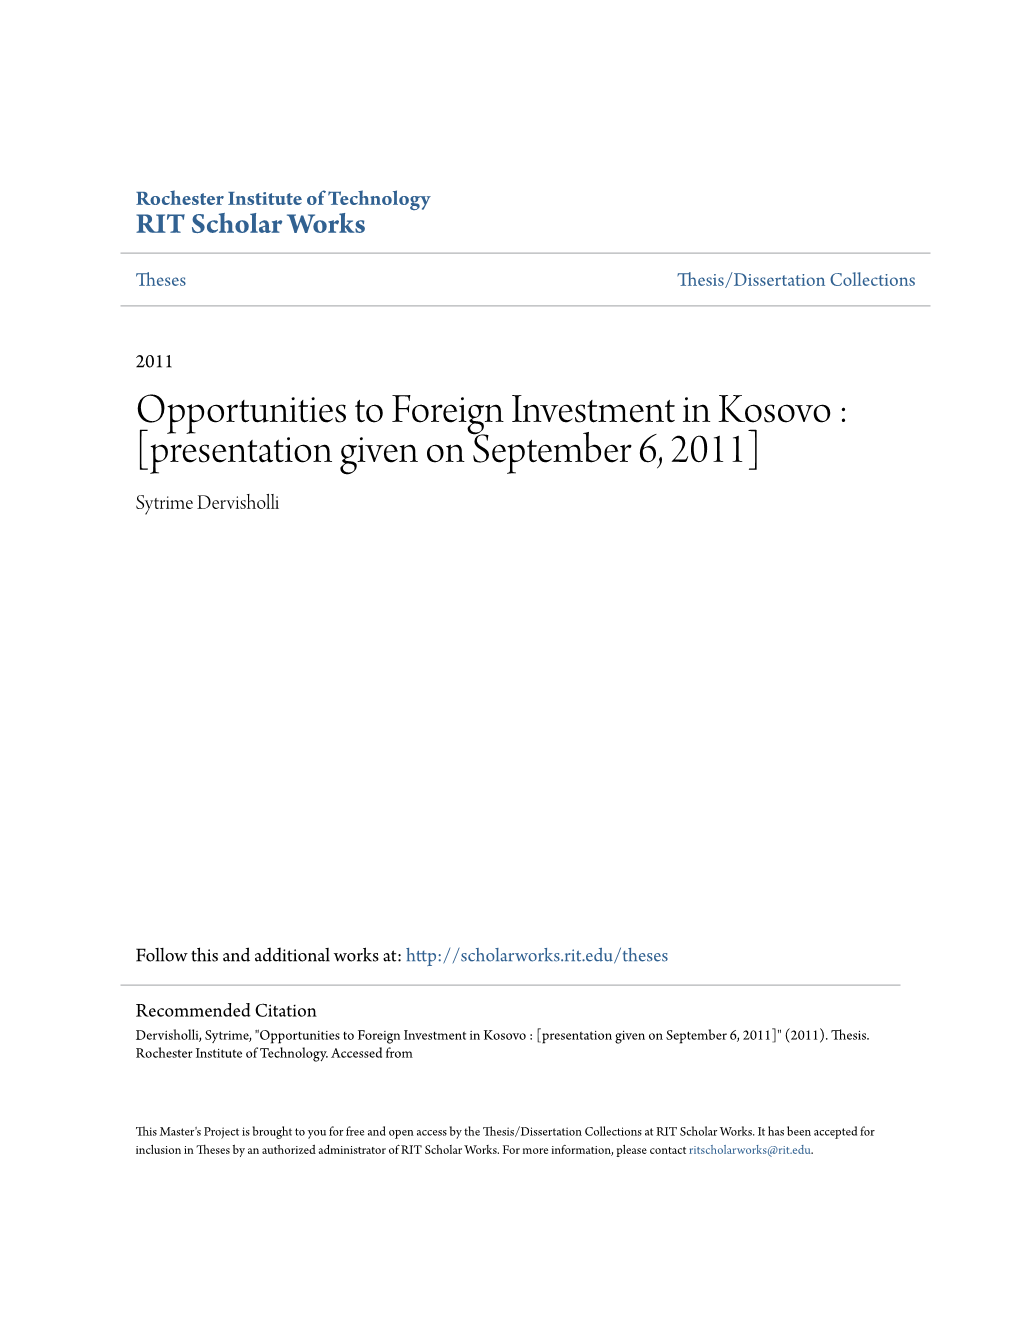 Opportunities to Foreign Investment in Kosovo : [Presentation Given on September 6, 2011] Sytrime Dervisholli